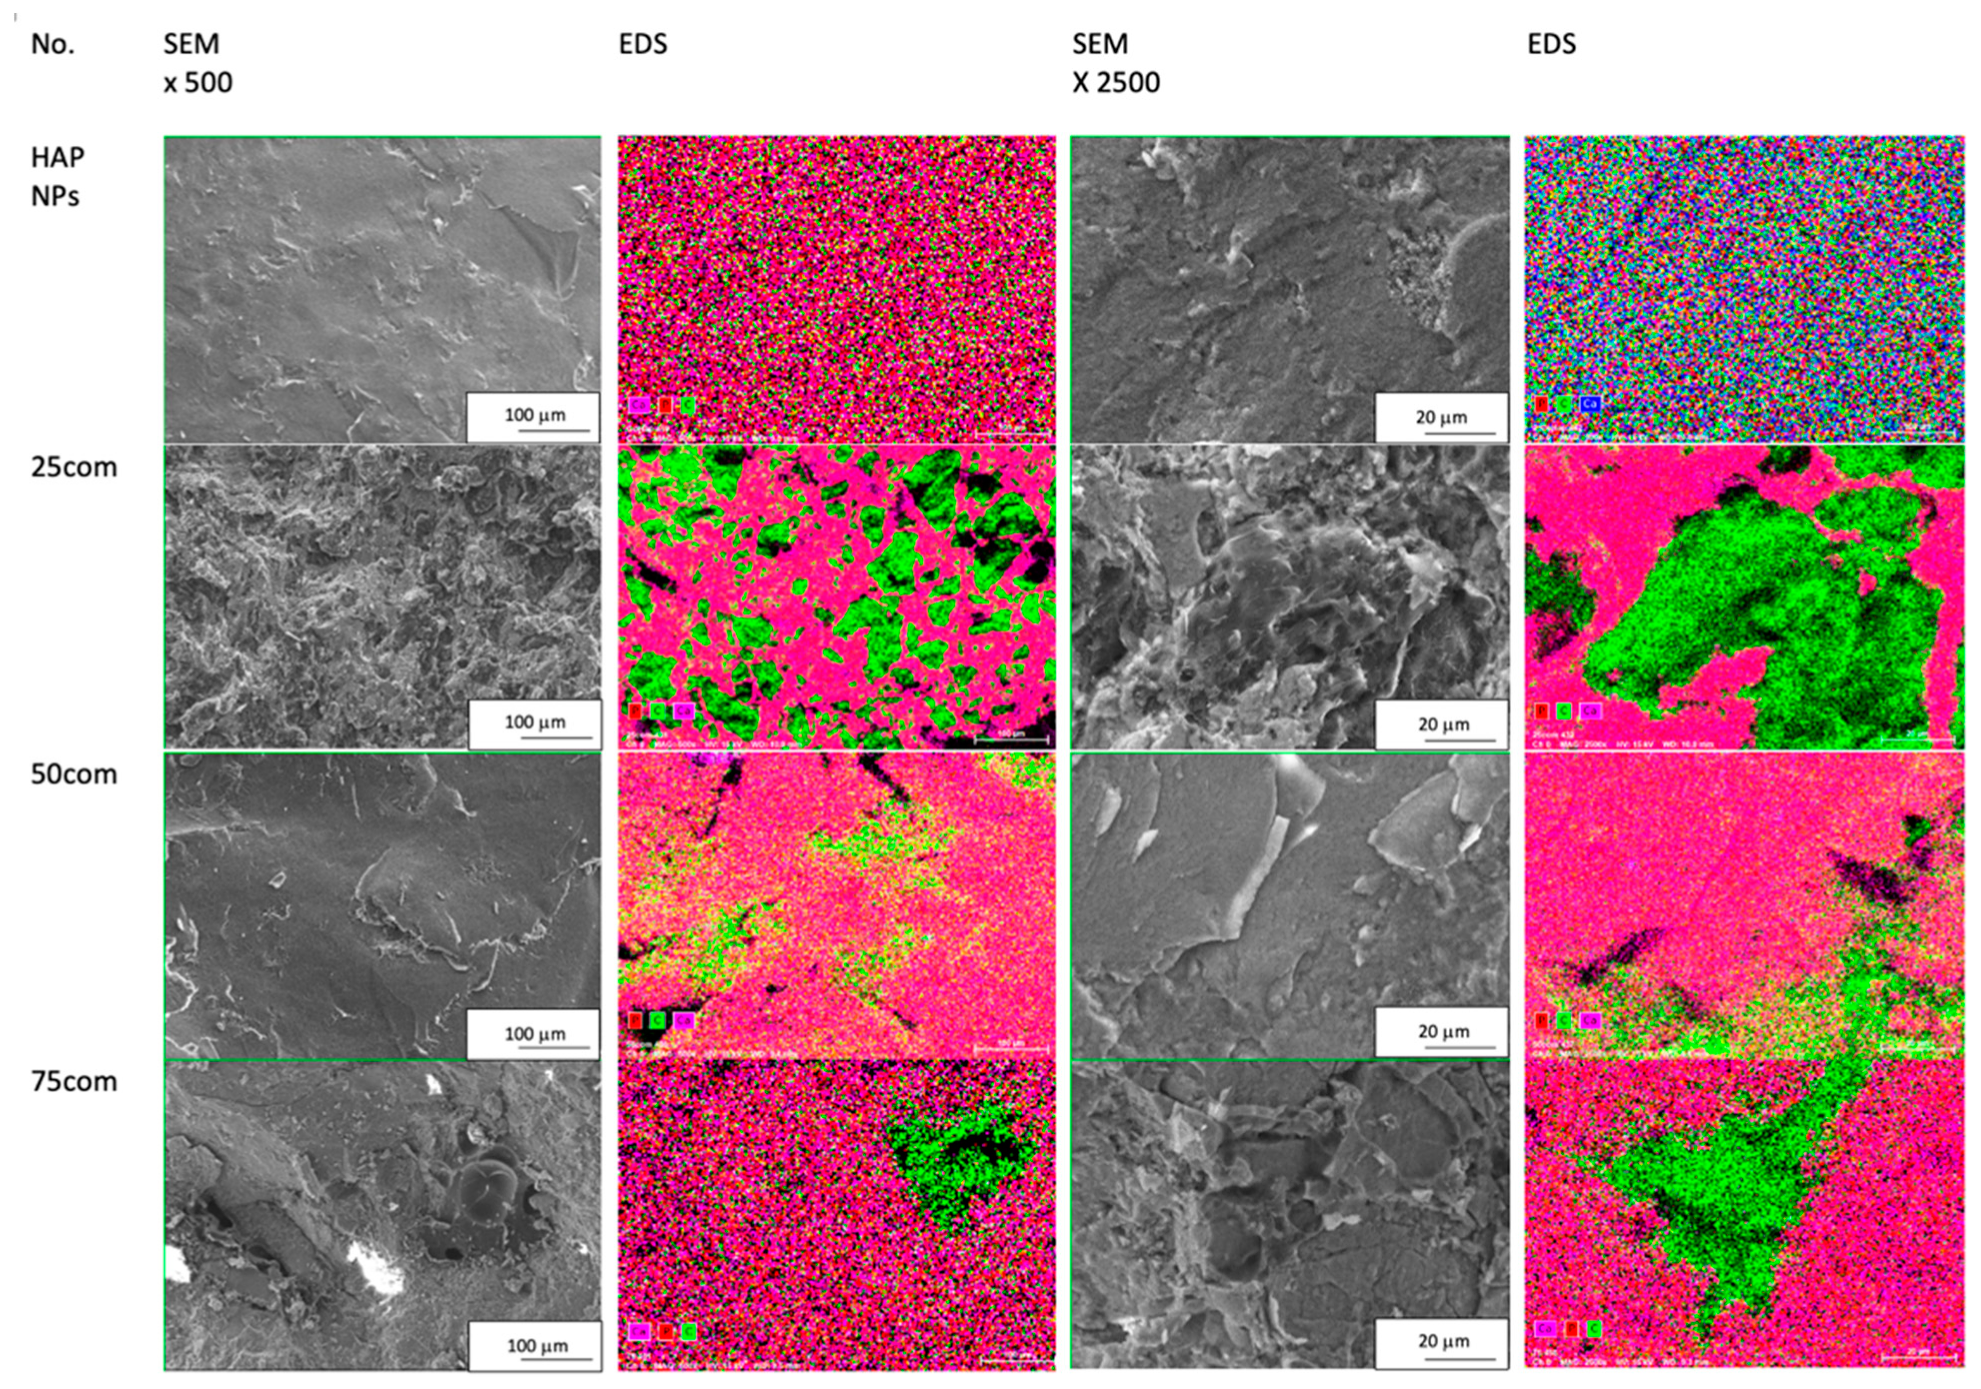 Collection of SEM images; EDS mapping for HAP NPs sample and 25com, 50com, and 75com composites.